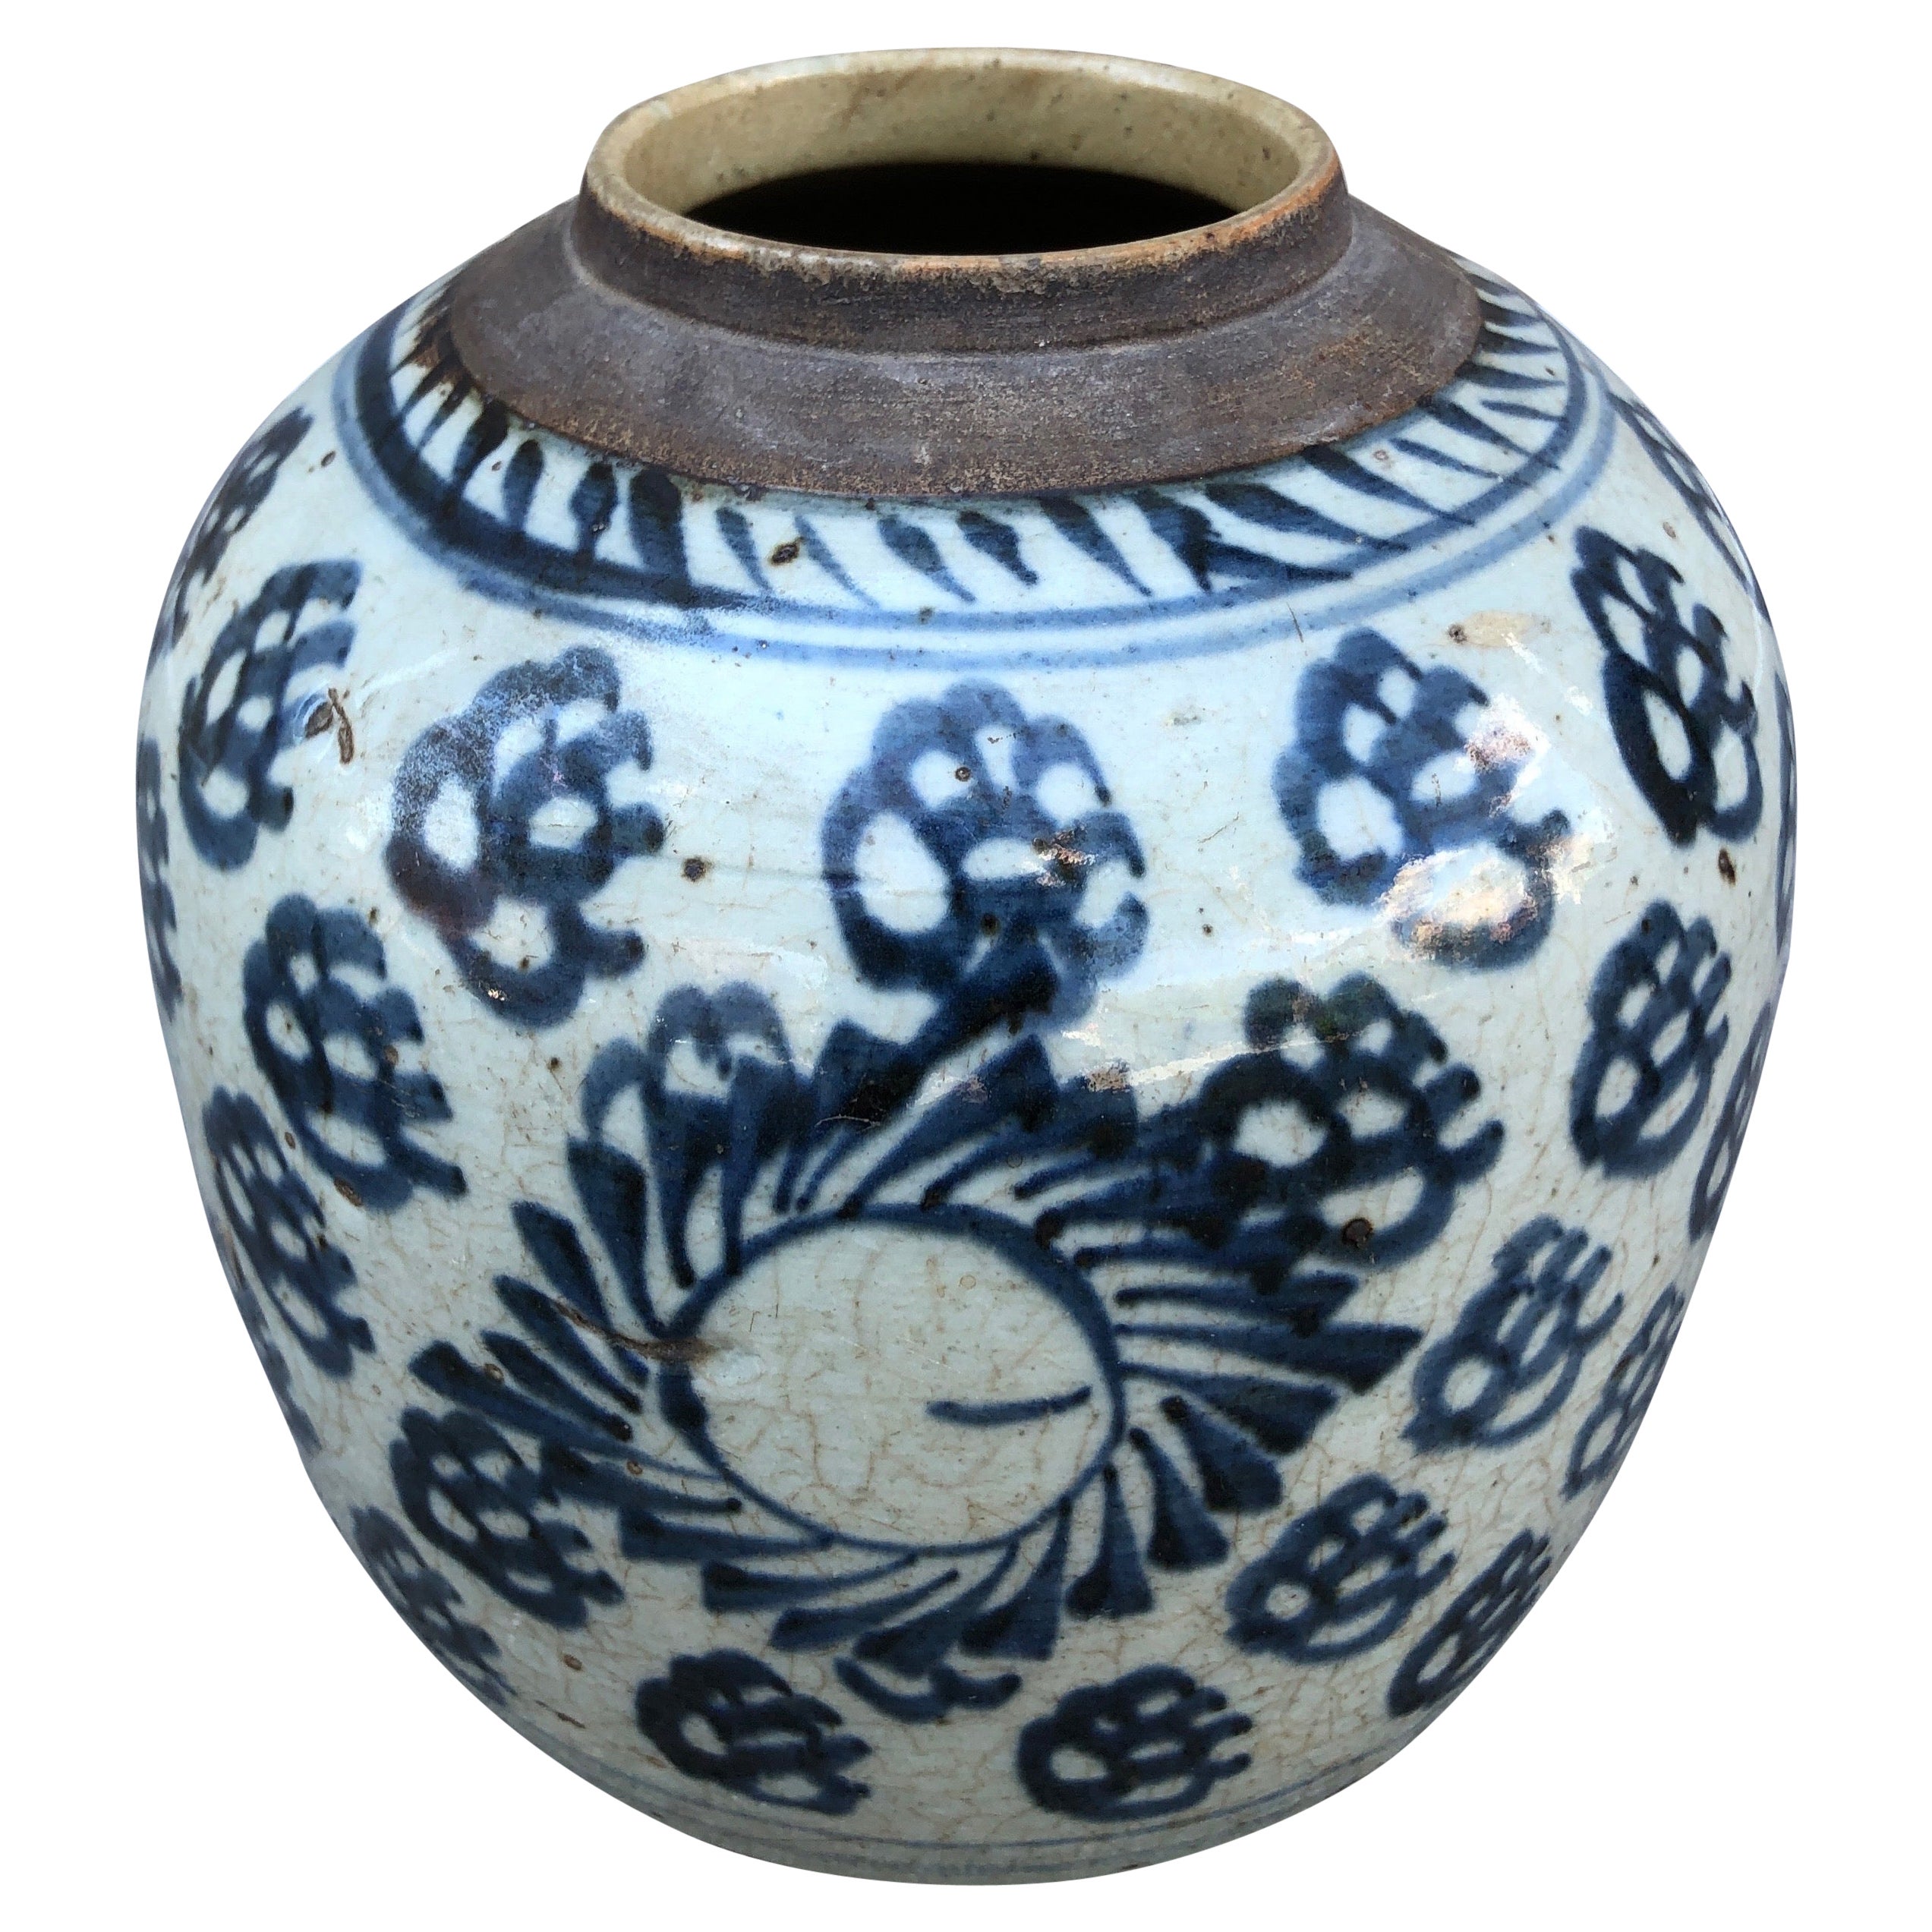 Antique Blue and White Porcelain Chinese Jar